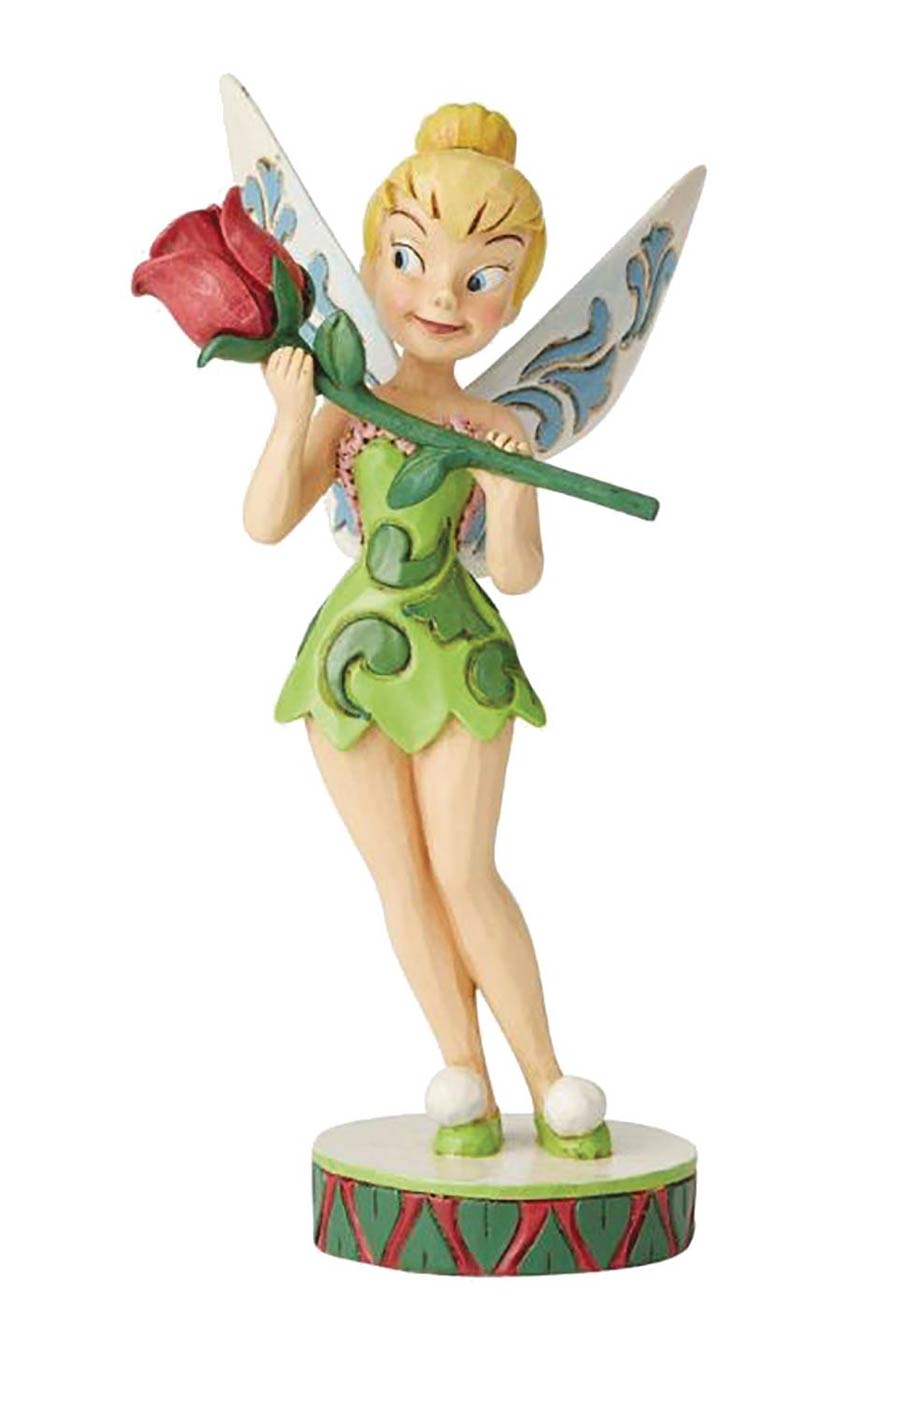 Peter Pan Tinker Bell Figurine - With Rose